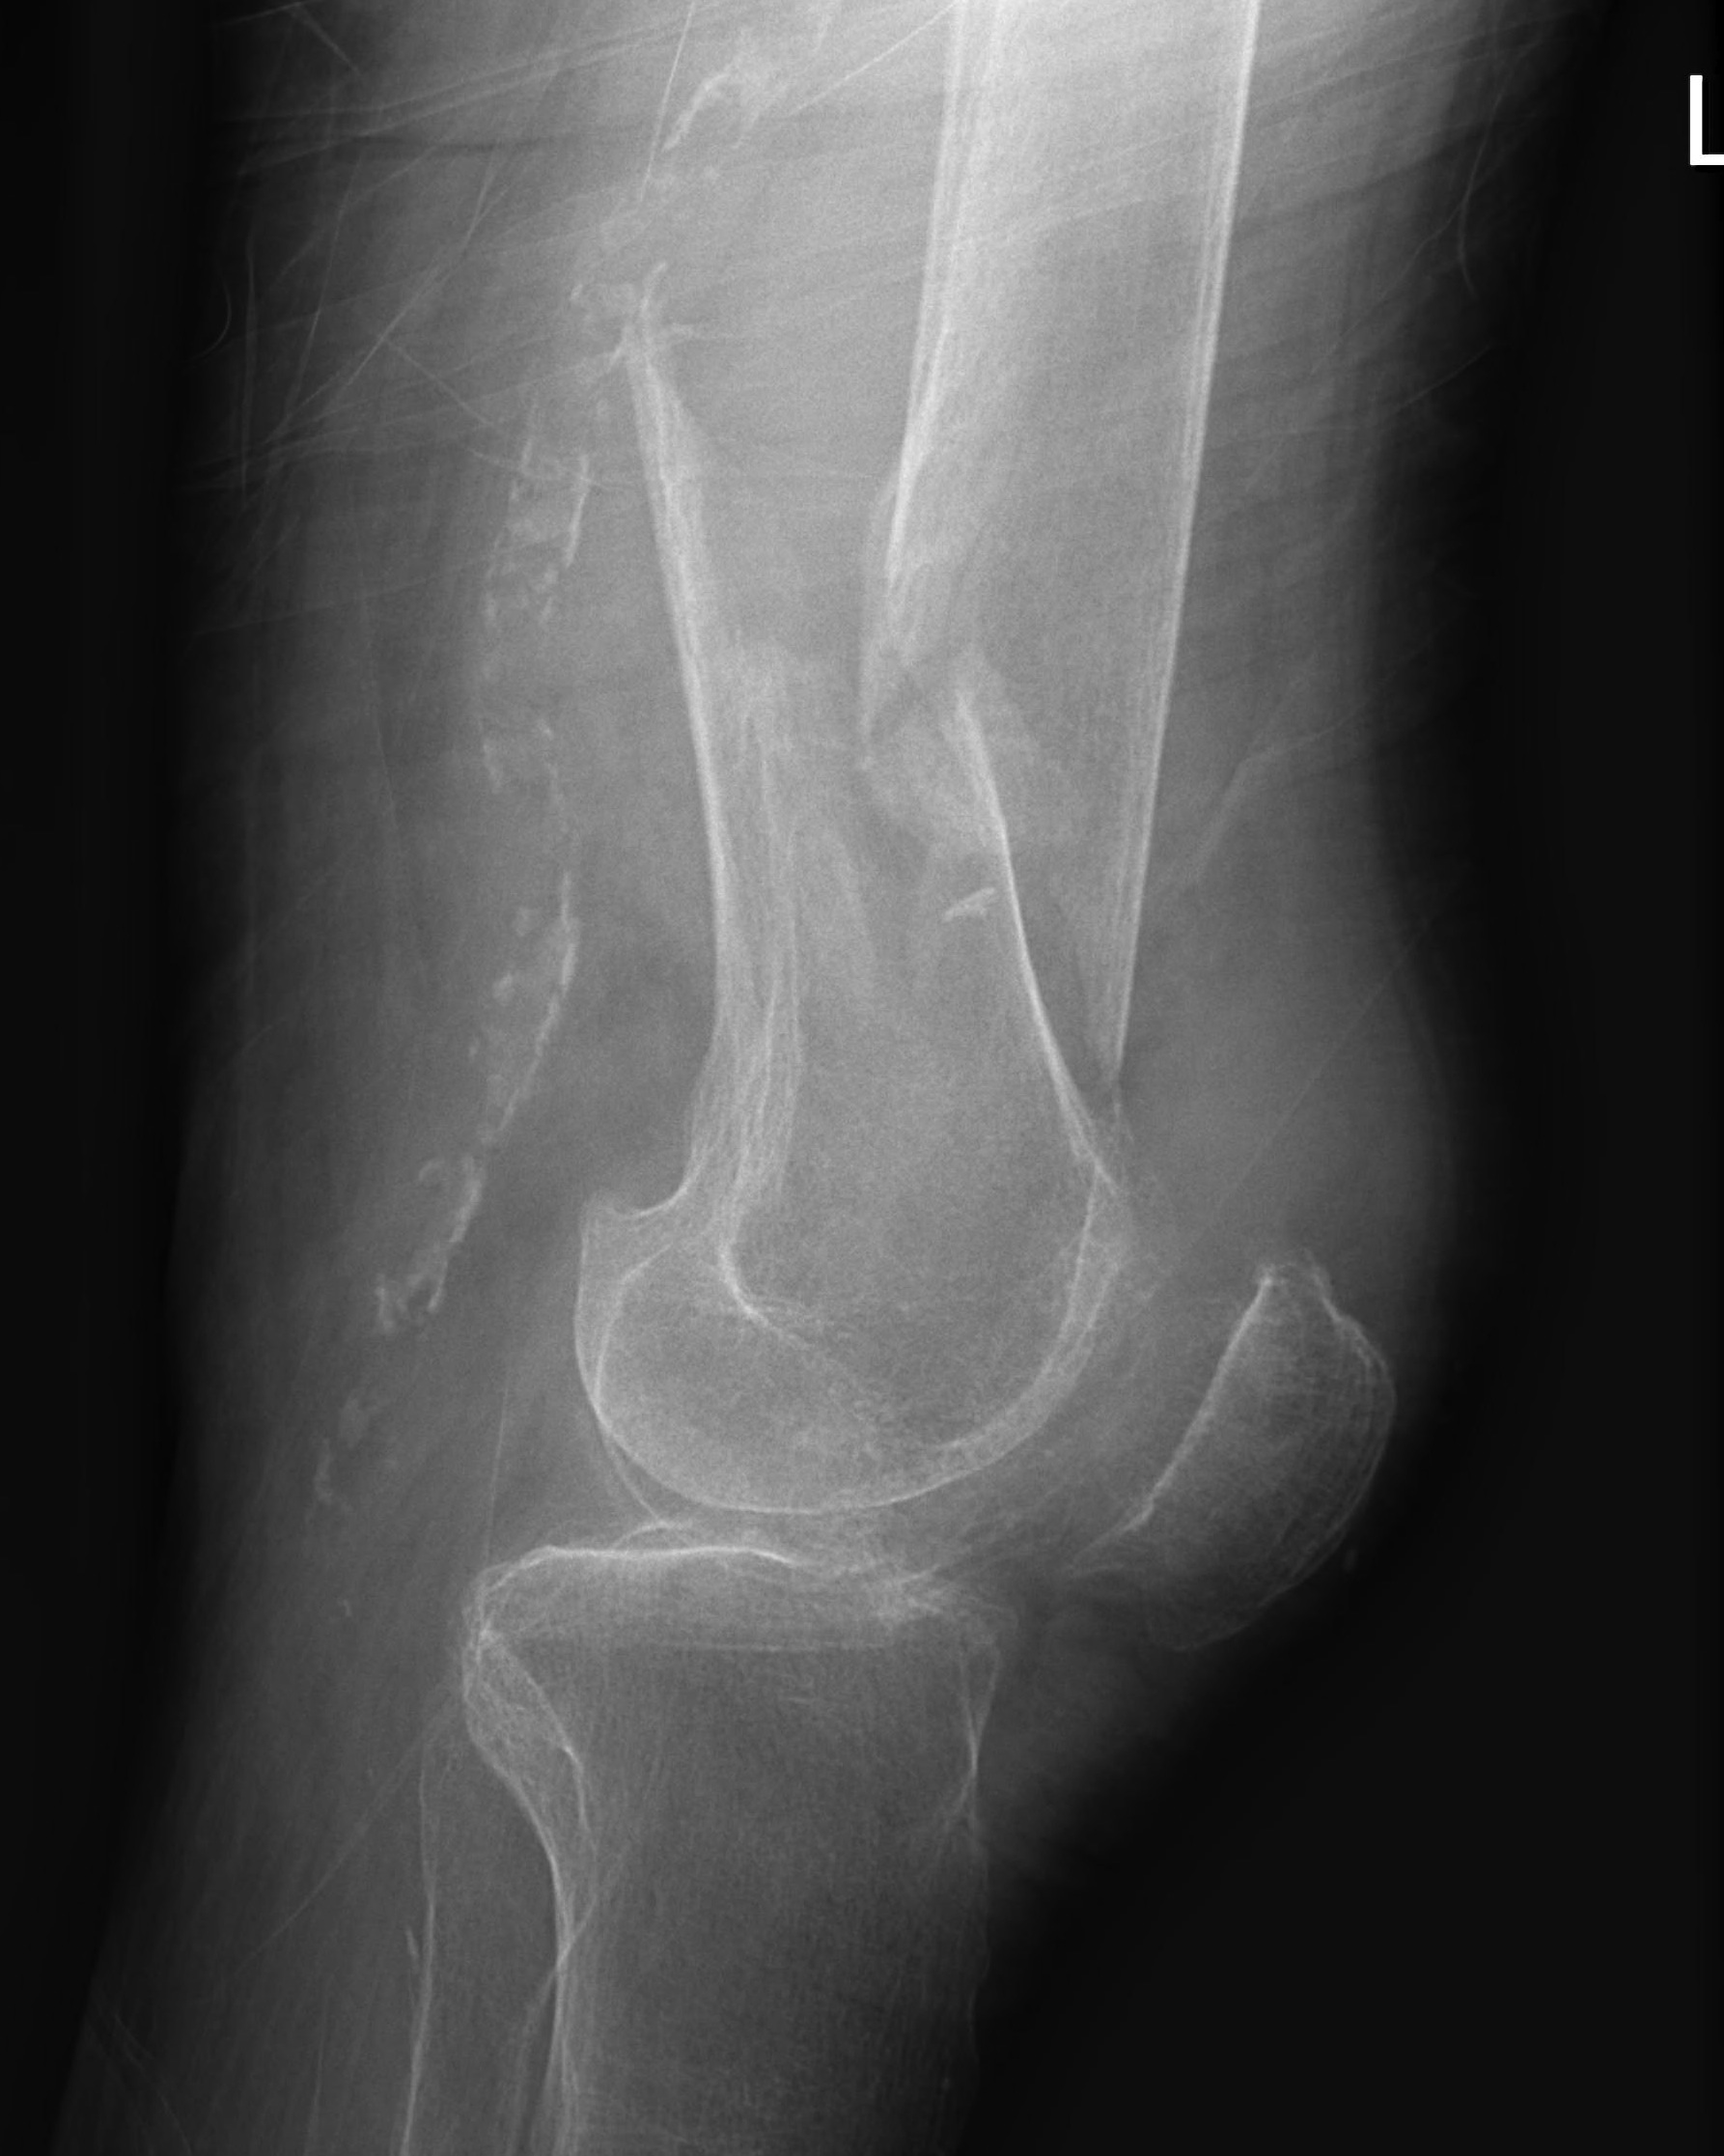 Distal Femur Fracture Lateral